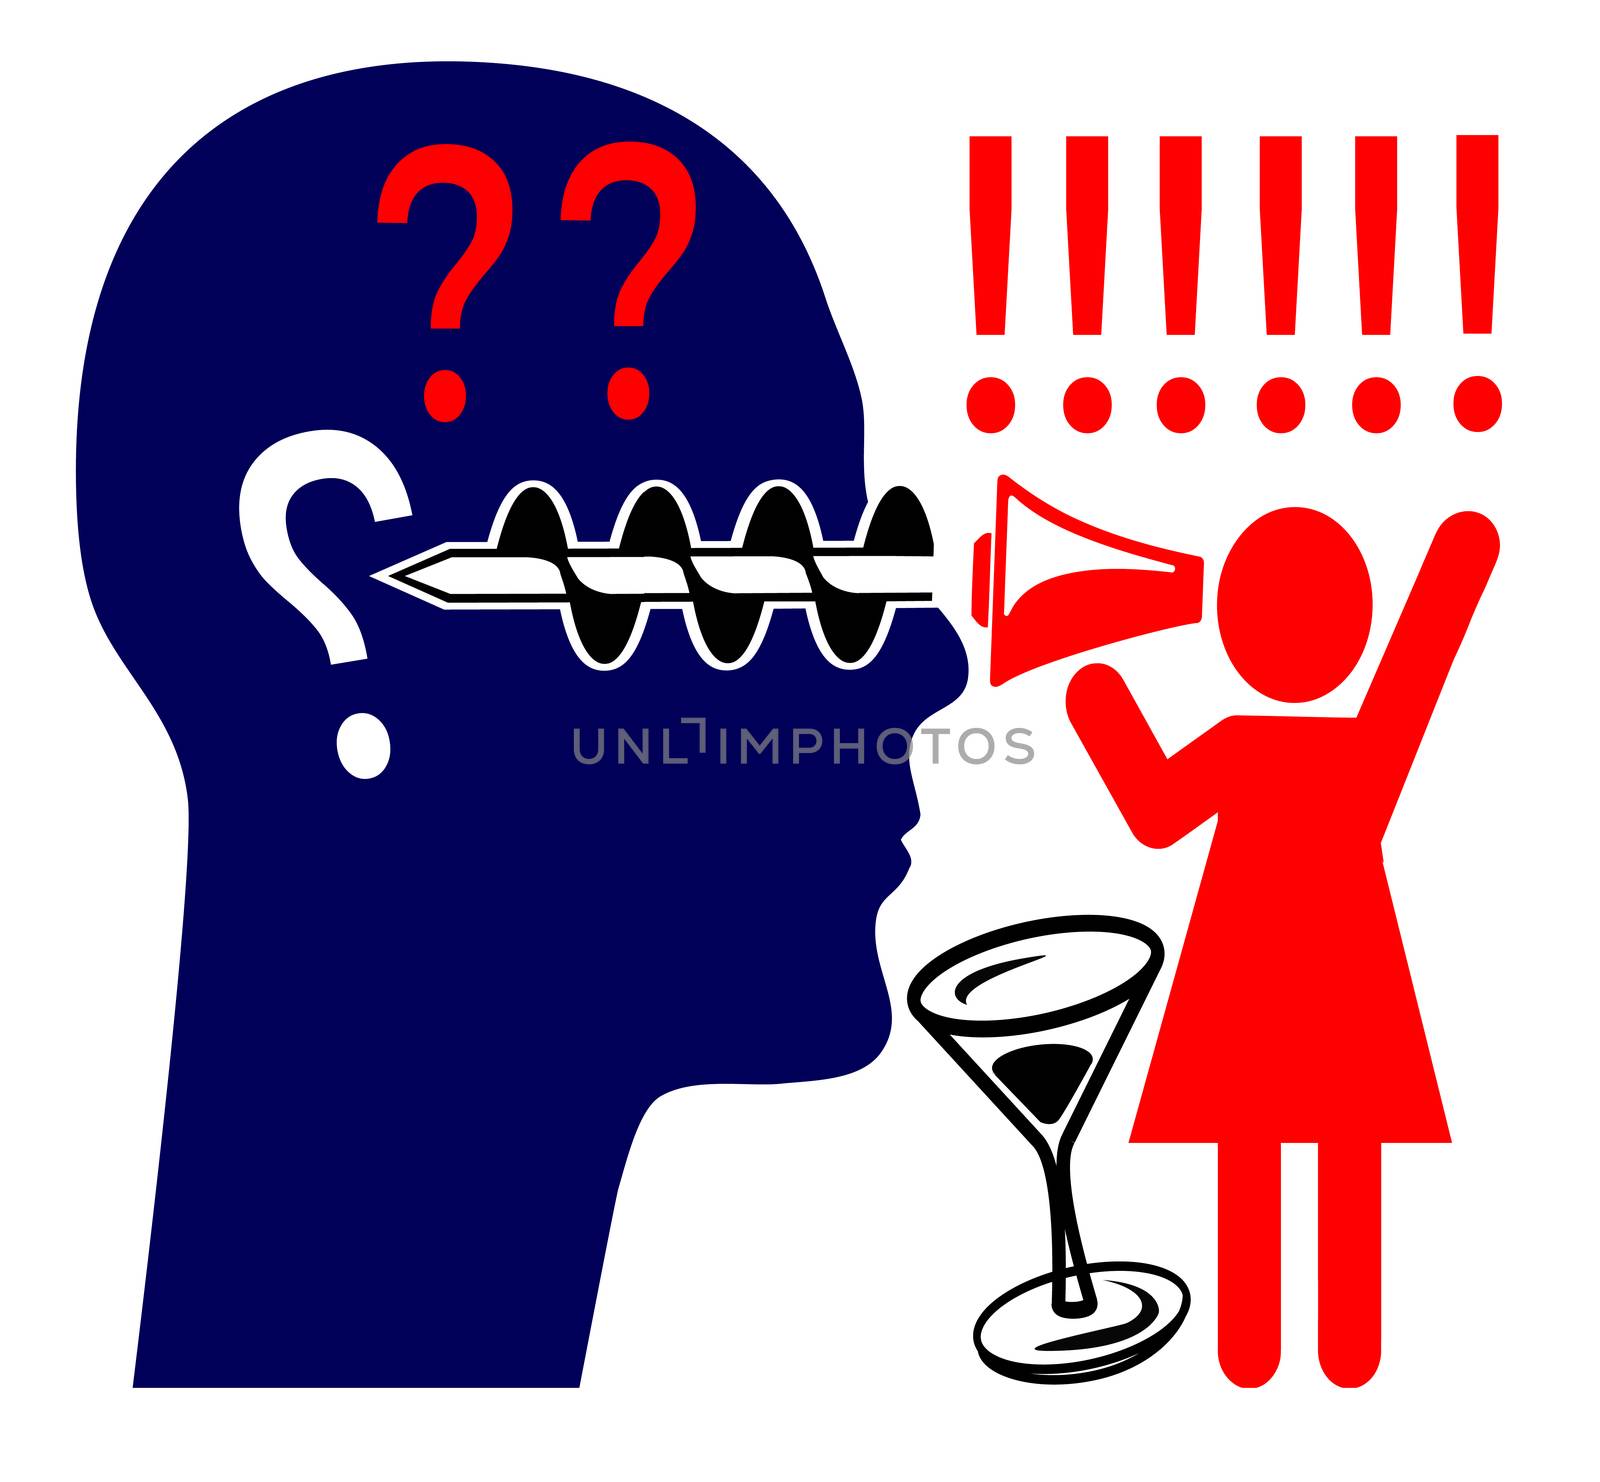 Wife quarreling over drinking habits and the husband does not care